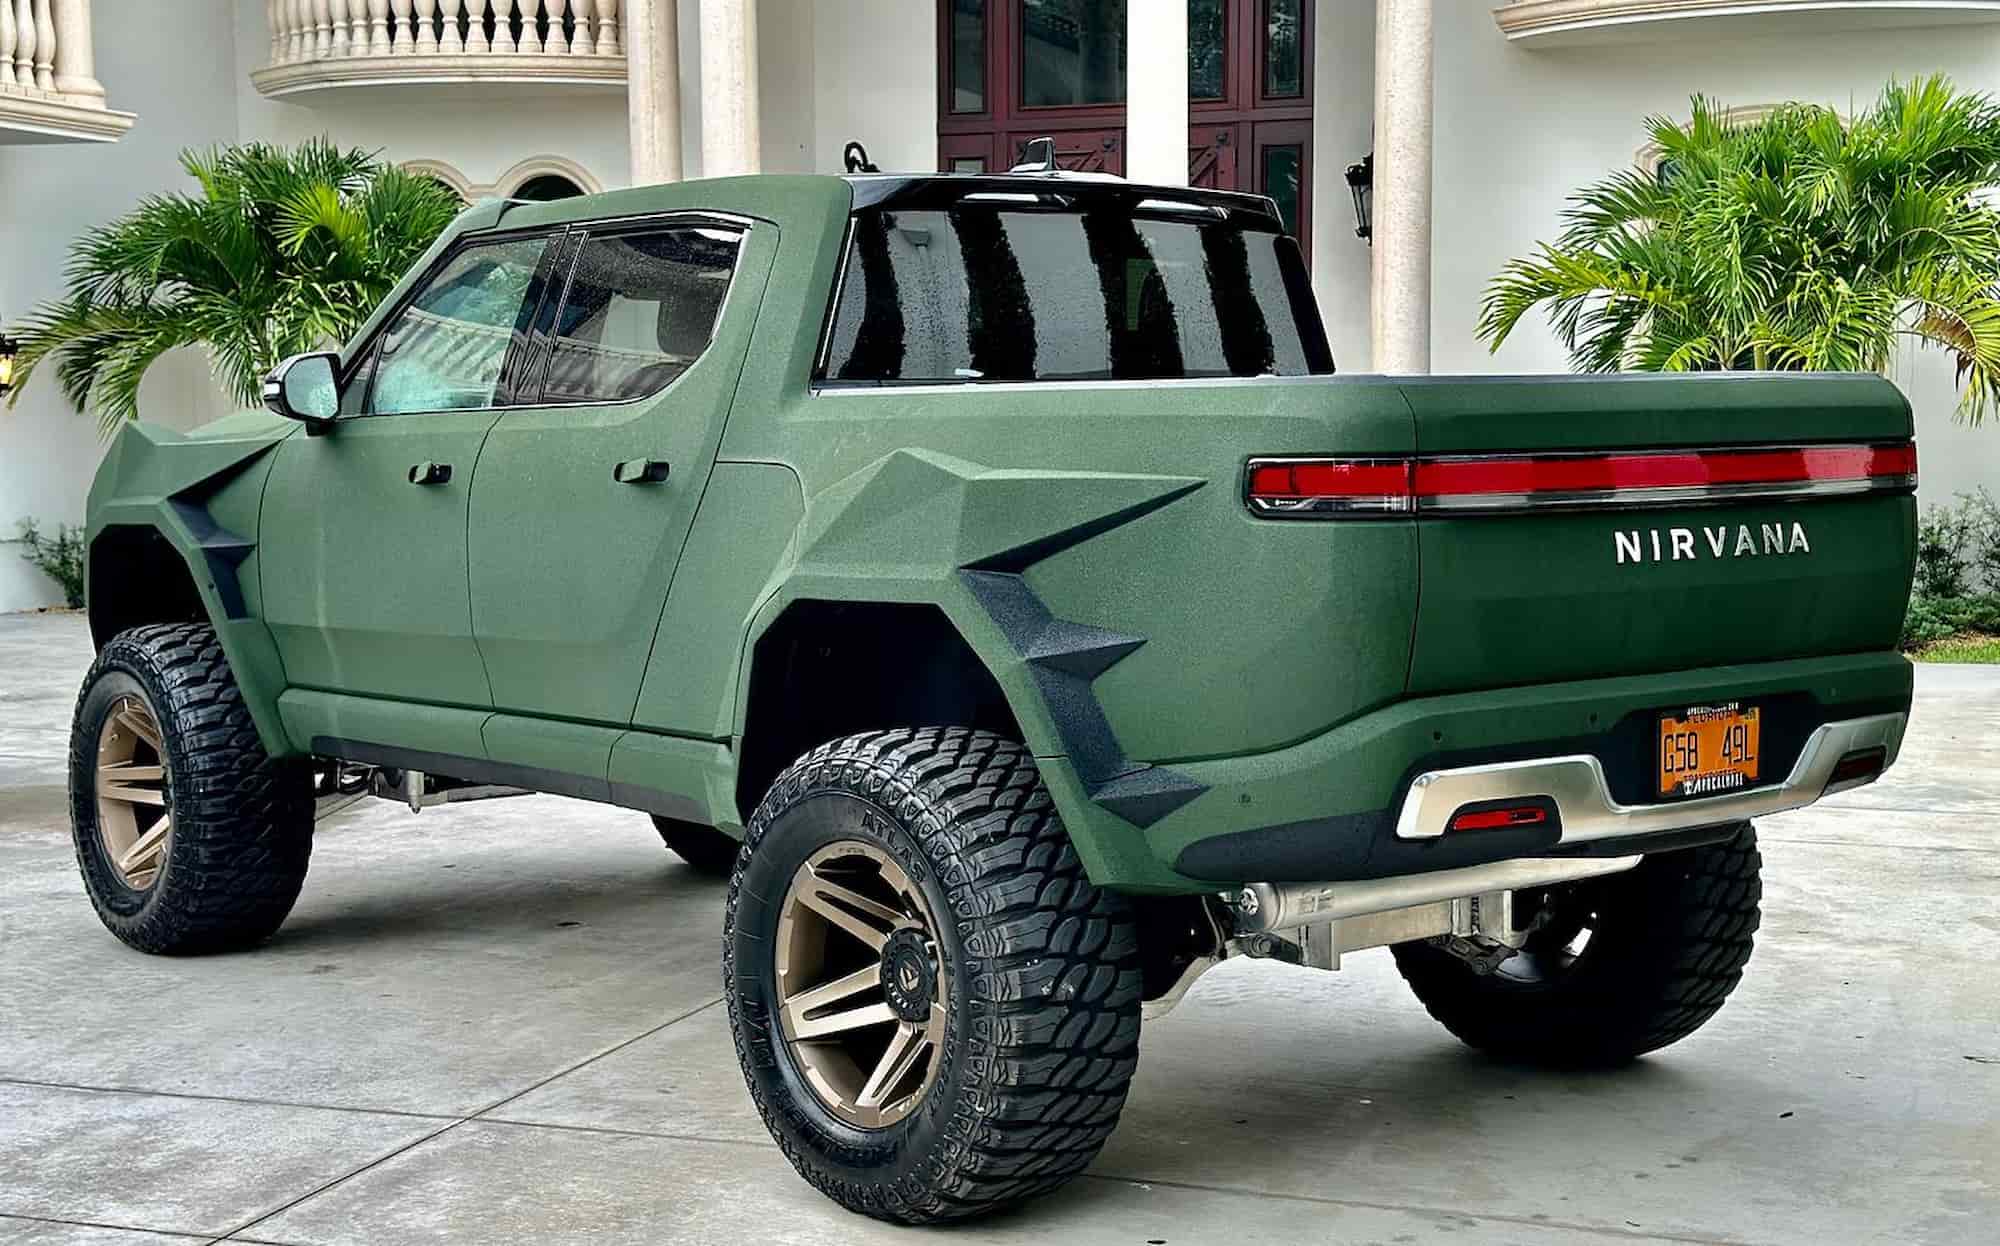 meet the apocalypse nirvana a rad rivian r1t on steroids claiming some outrageous numbers 1